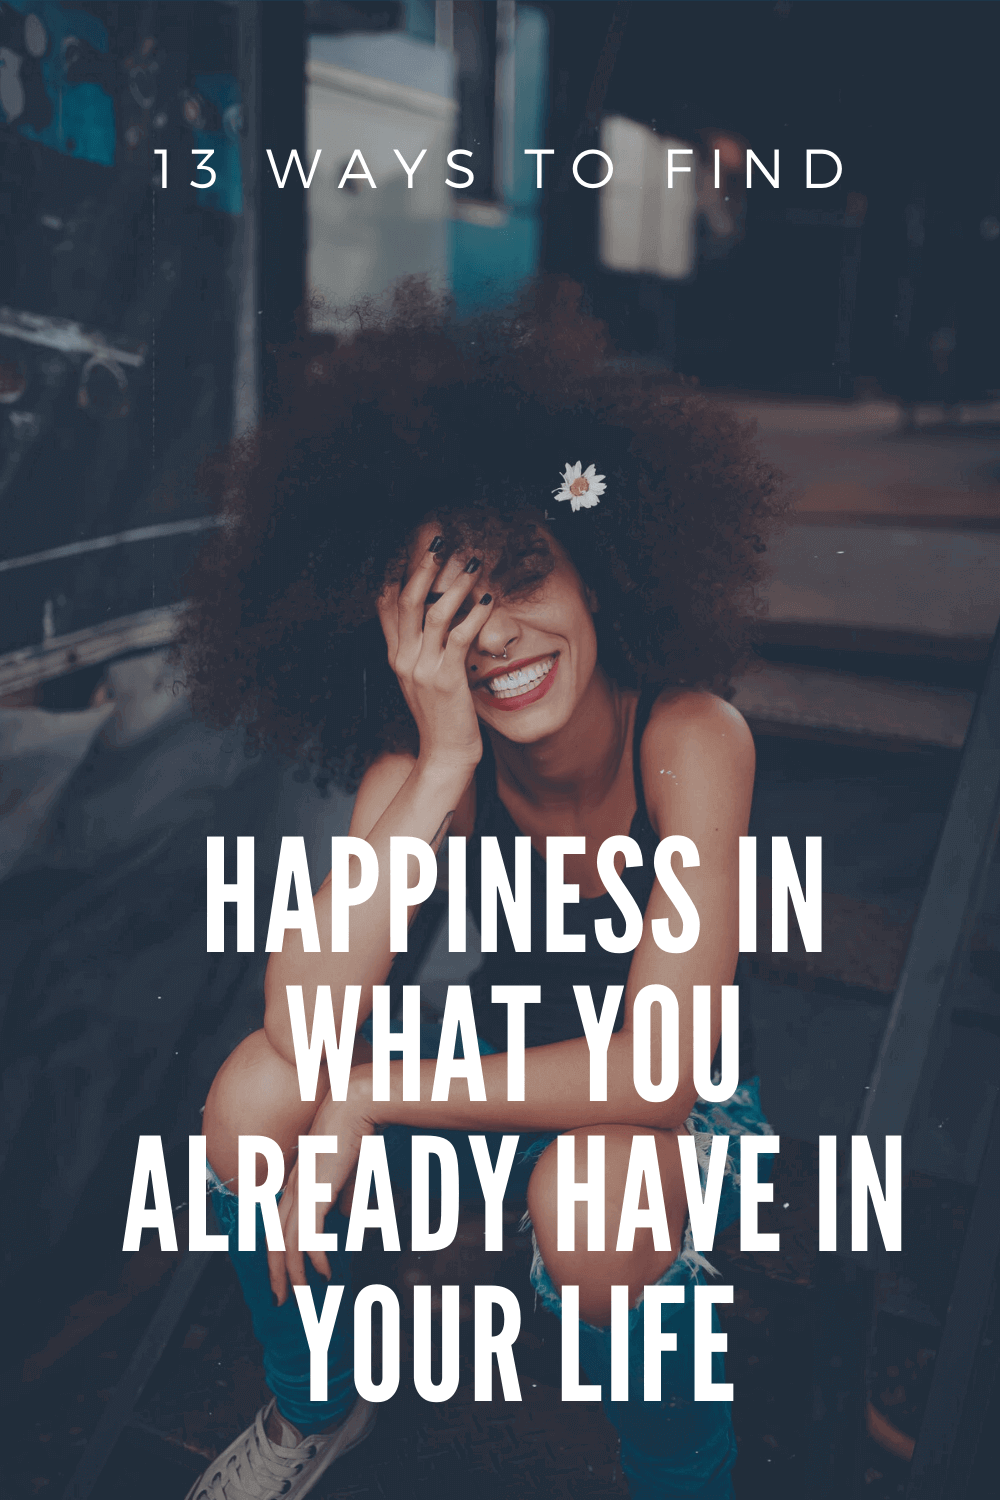 13 ways to find happiness in what you already have in your life